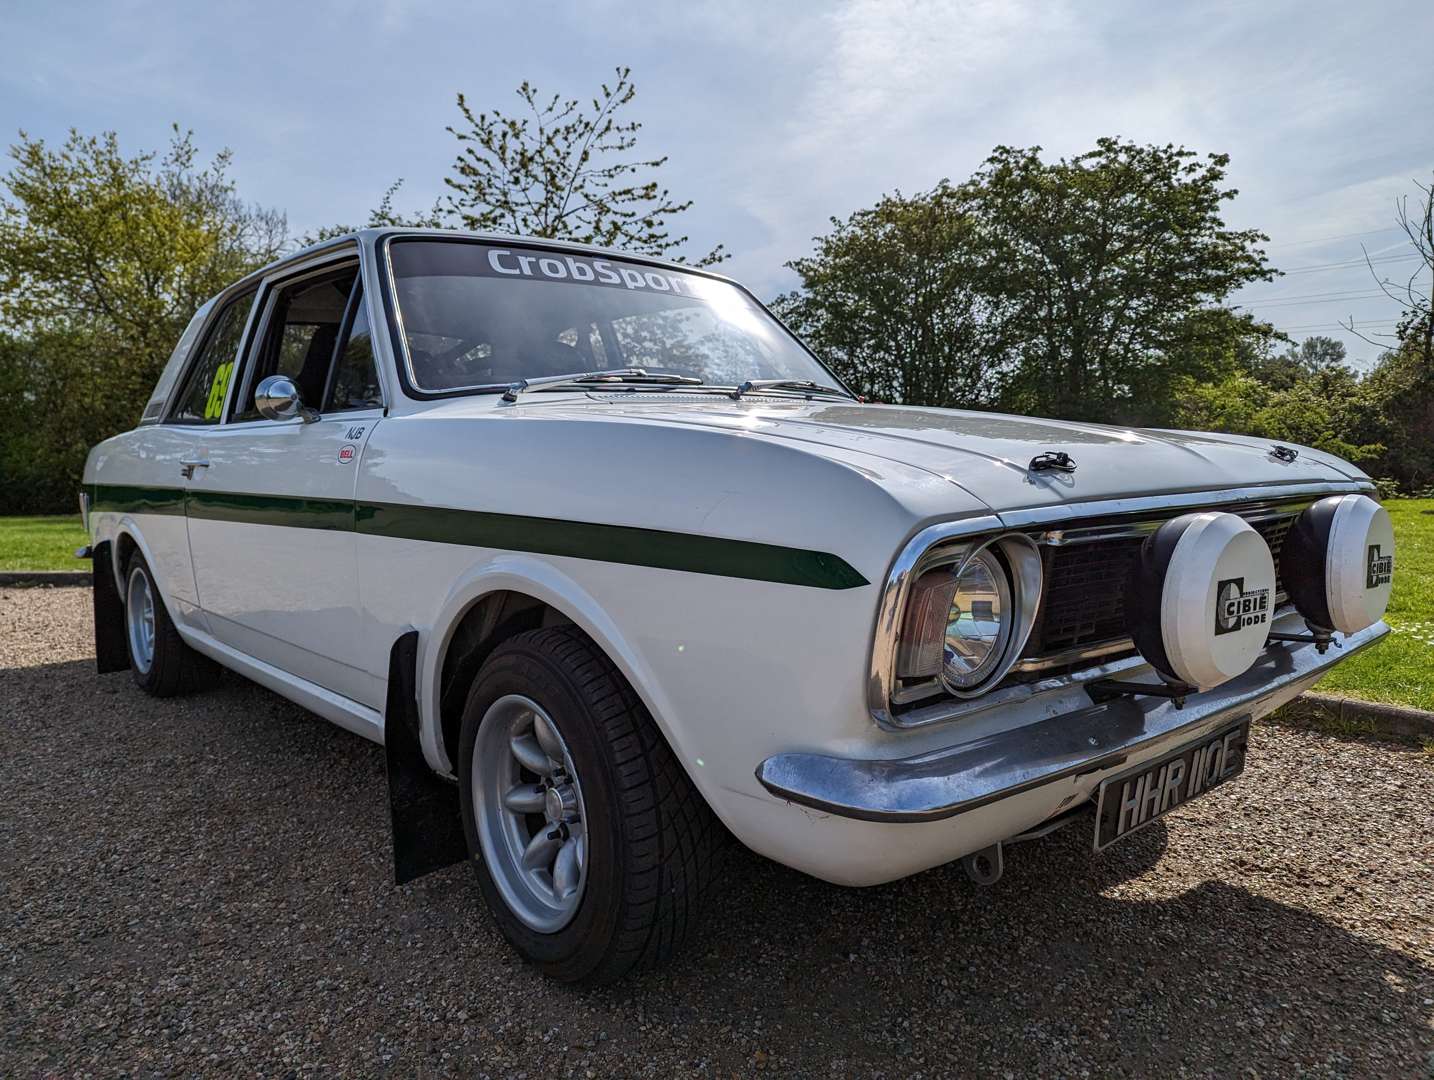 1967 FORD CORTINA MKII&nbsp; - Image 9 of 30